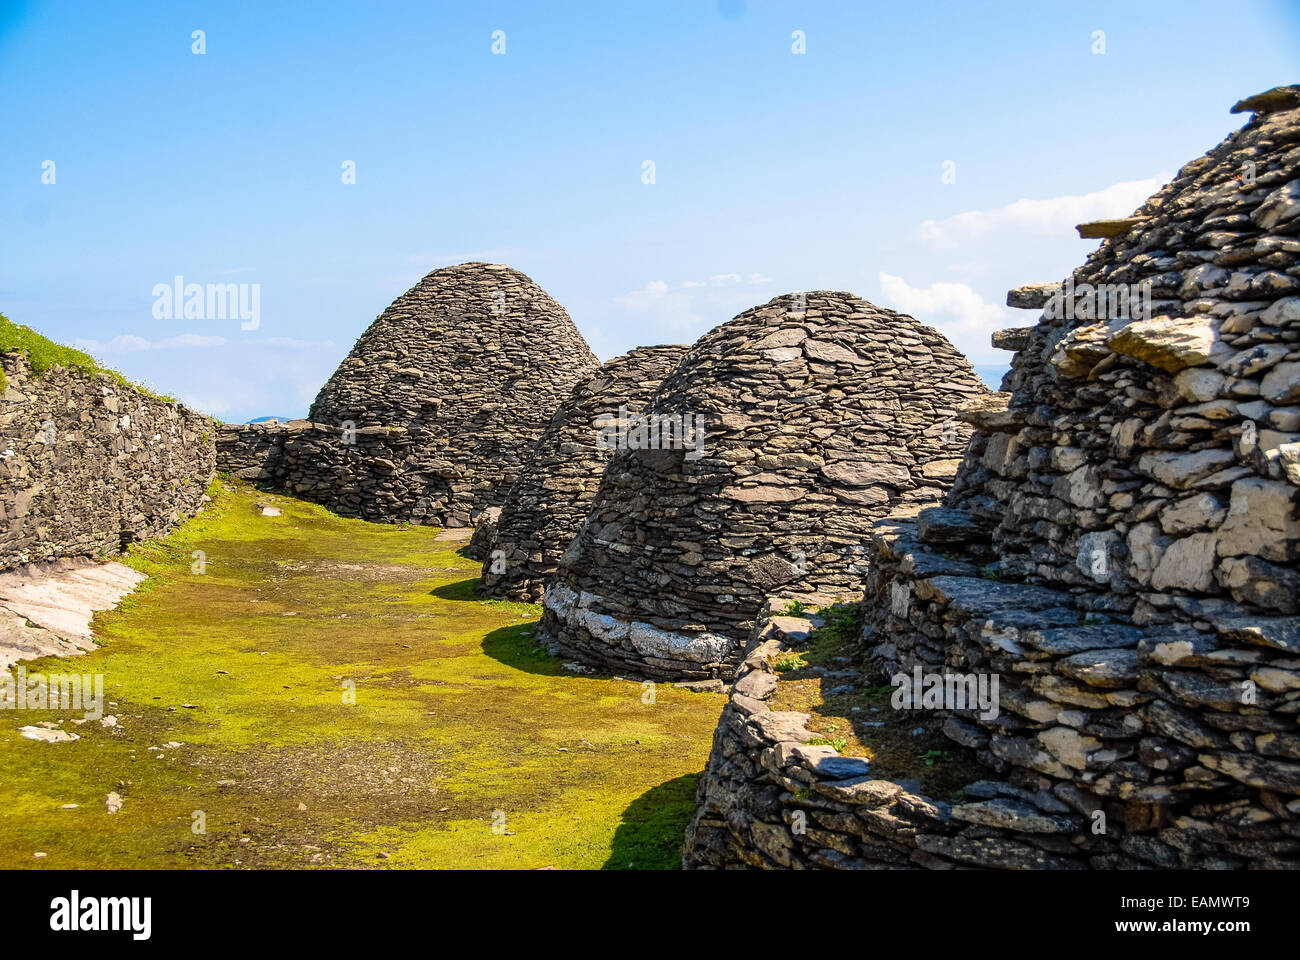 the famous island of skellig micheal in ireland Stock Photo